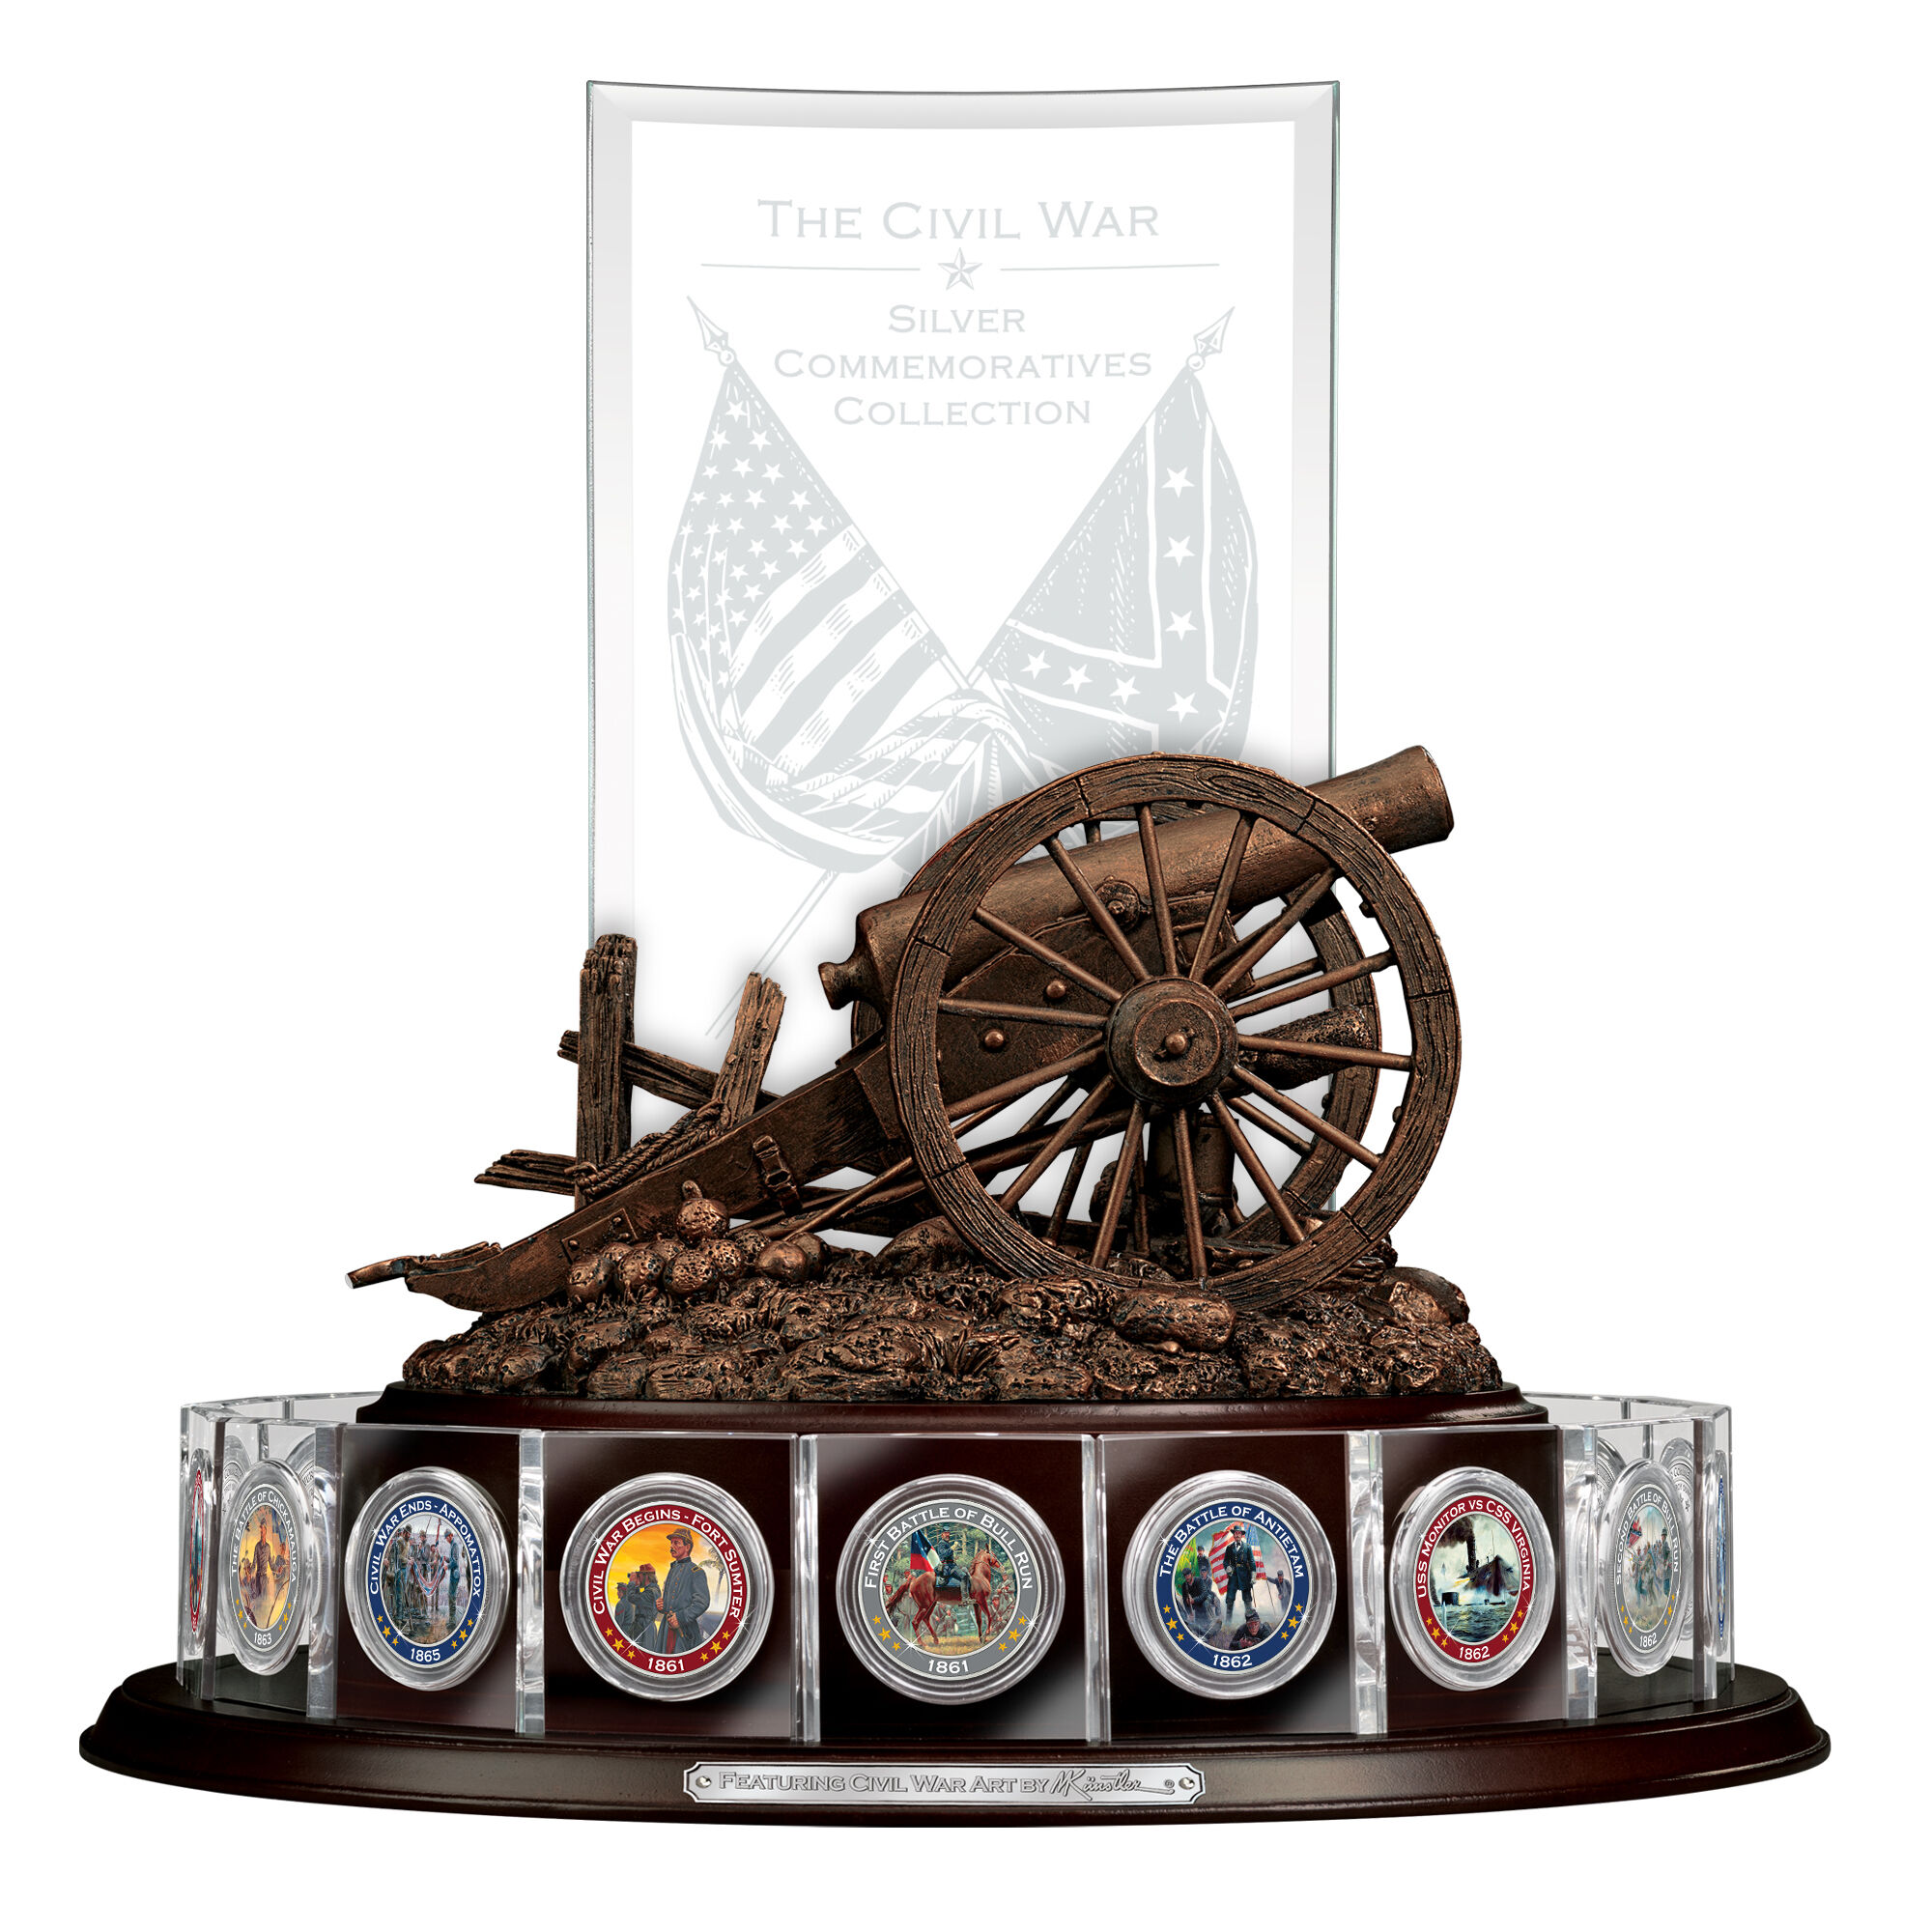 The Civil War Silver Commemoratives Collection 2431 0039 a display